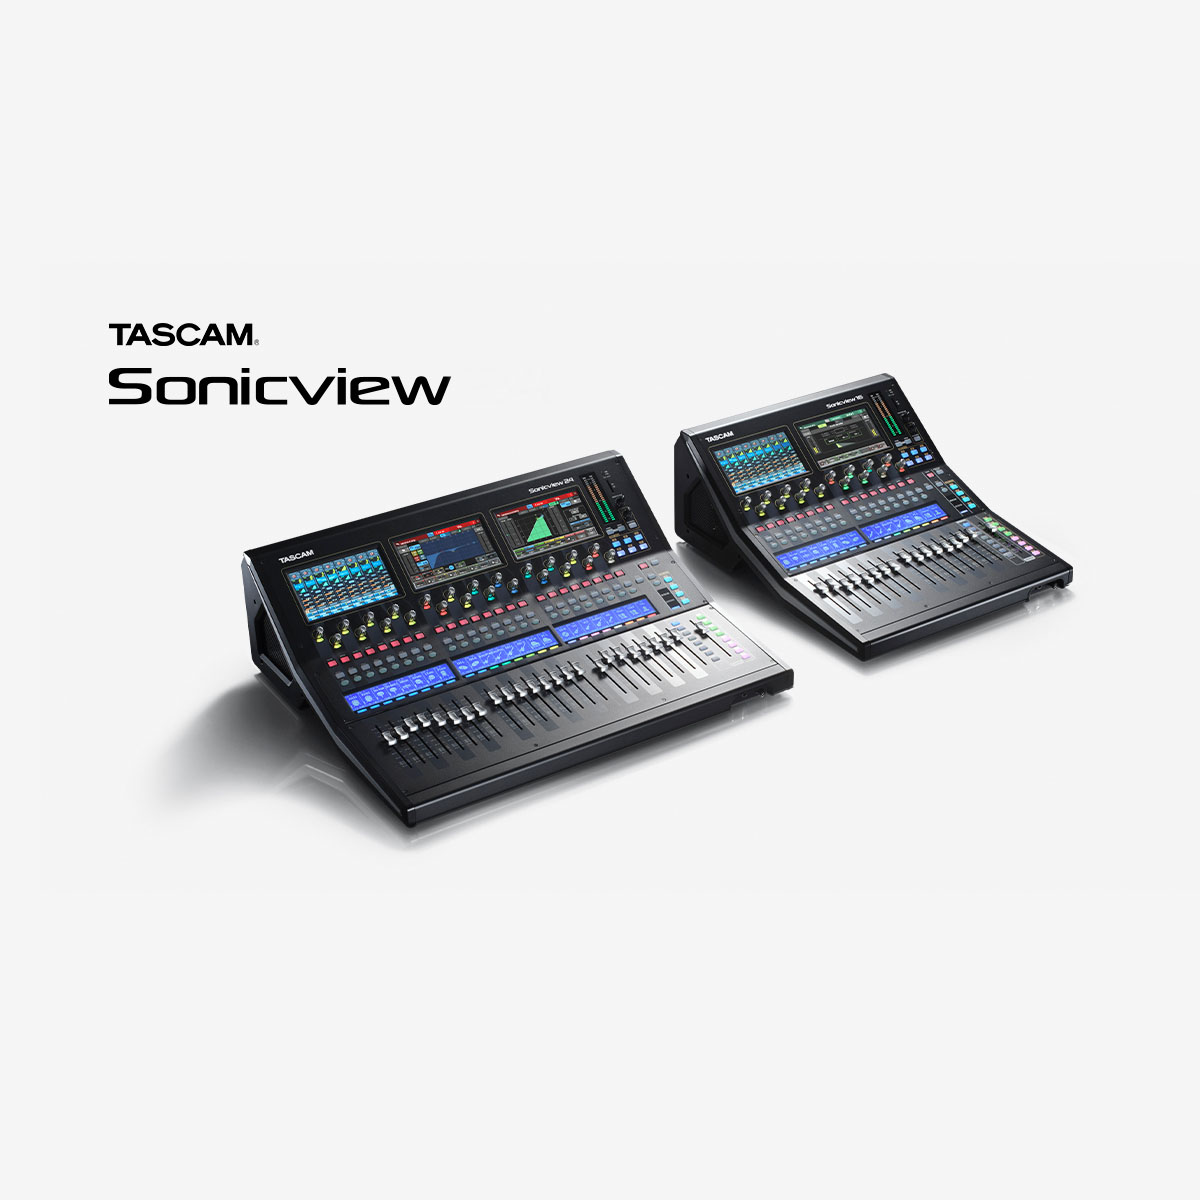 TASCAM Announces V1.5 Firmware Update for the Sonicview 16XP/24XP Digital Recording and Mixer